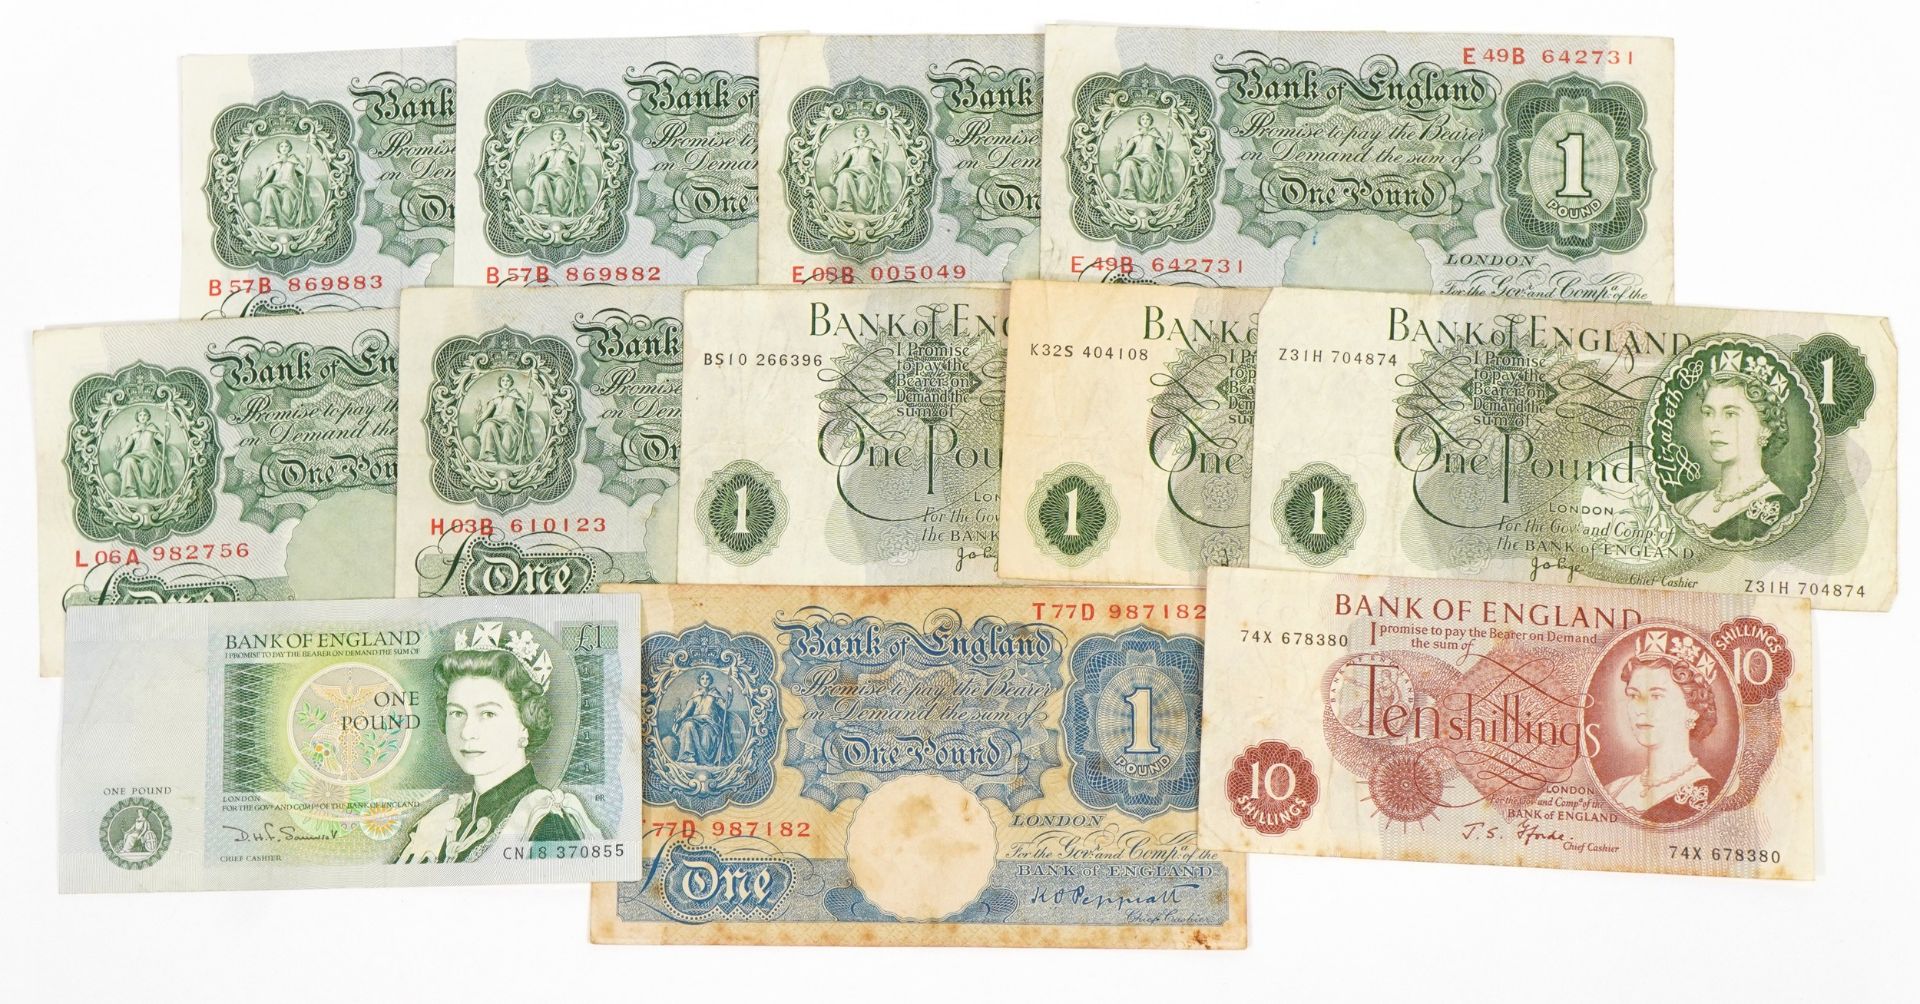 Bank of England banknotes comprising ten shillings and one pound, including emergency issue one